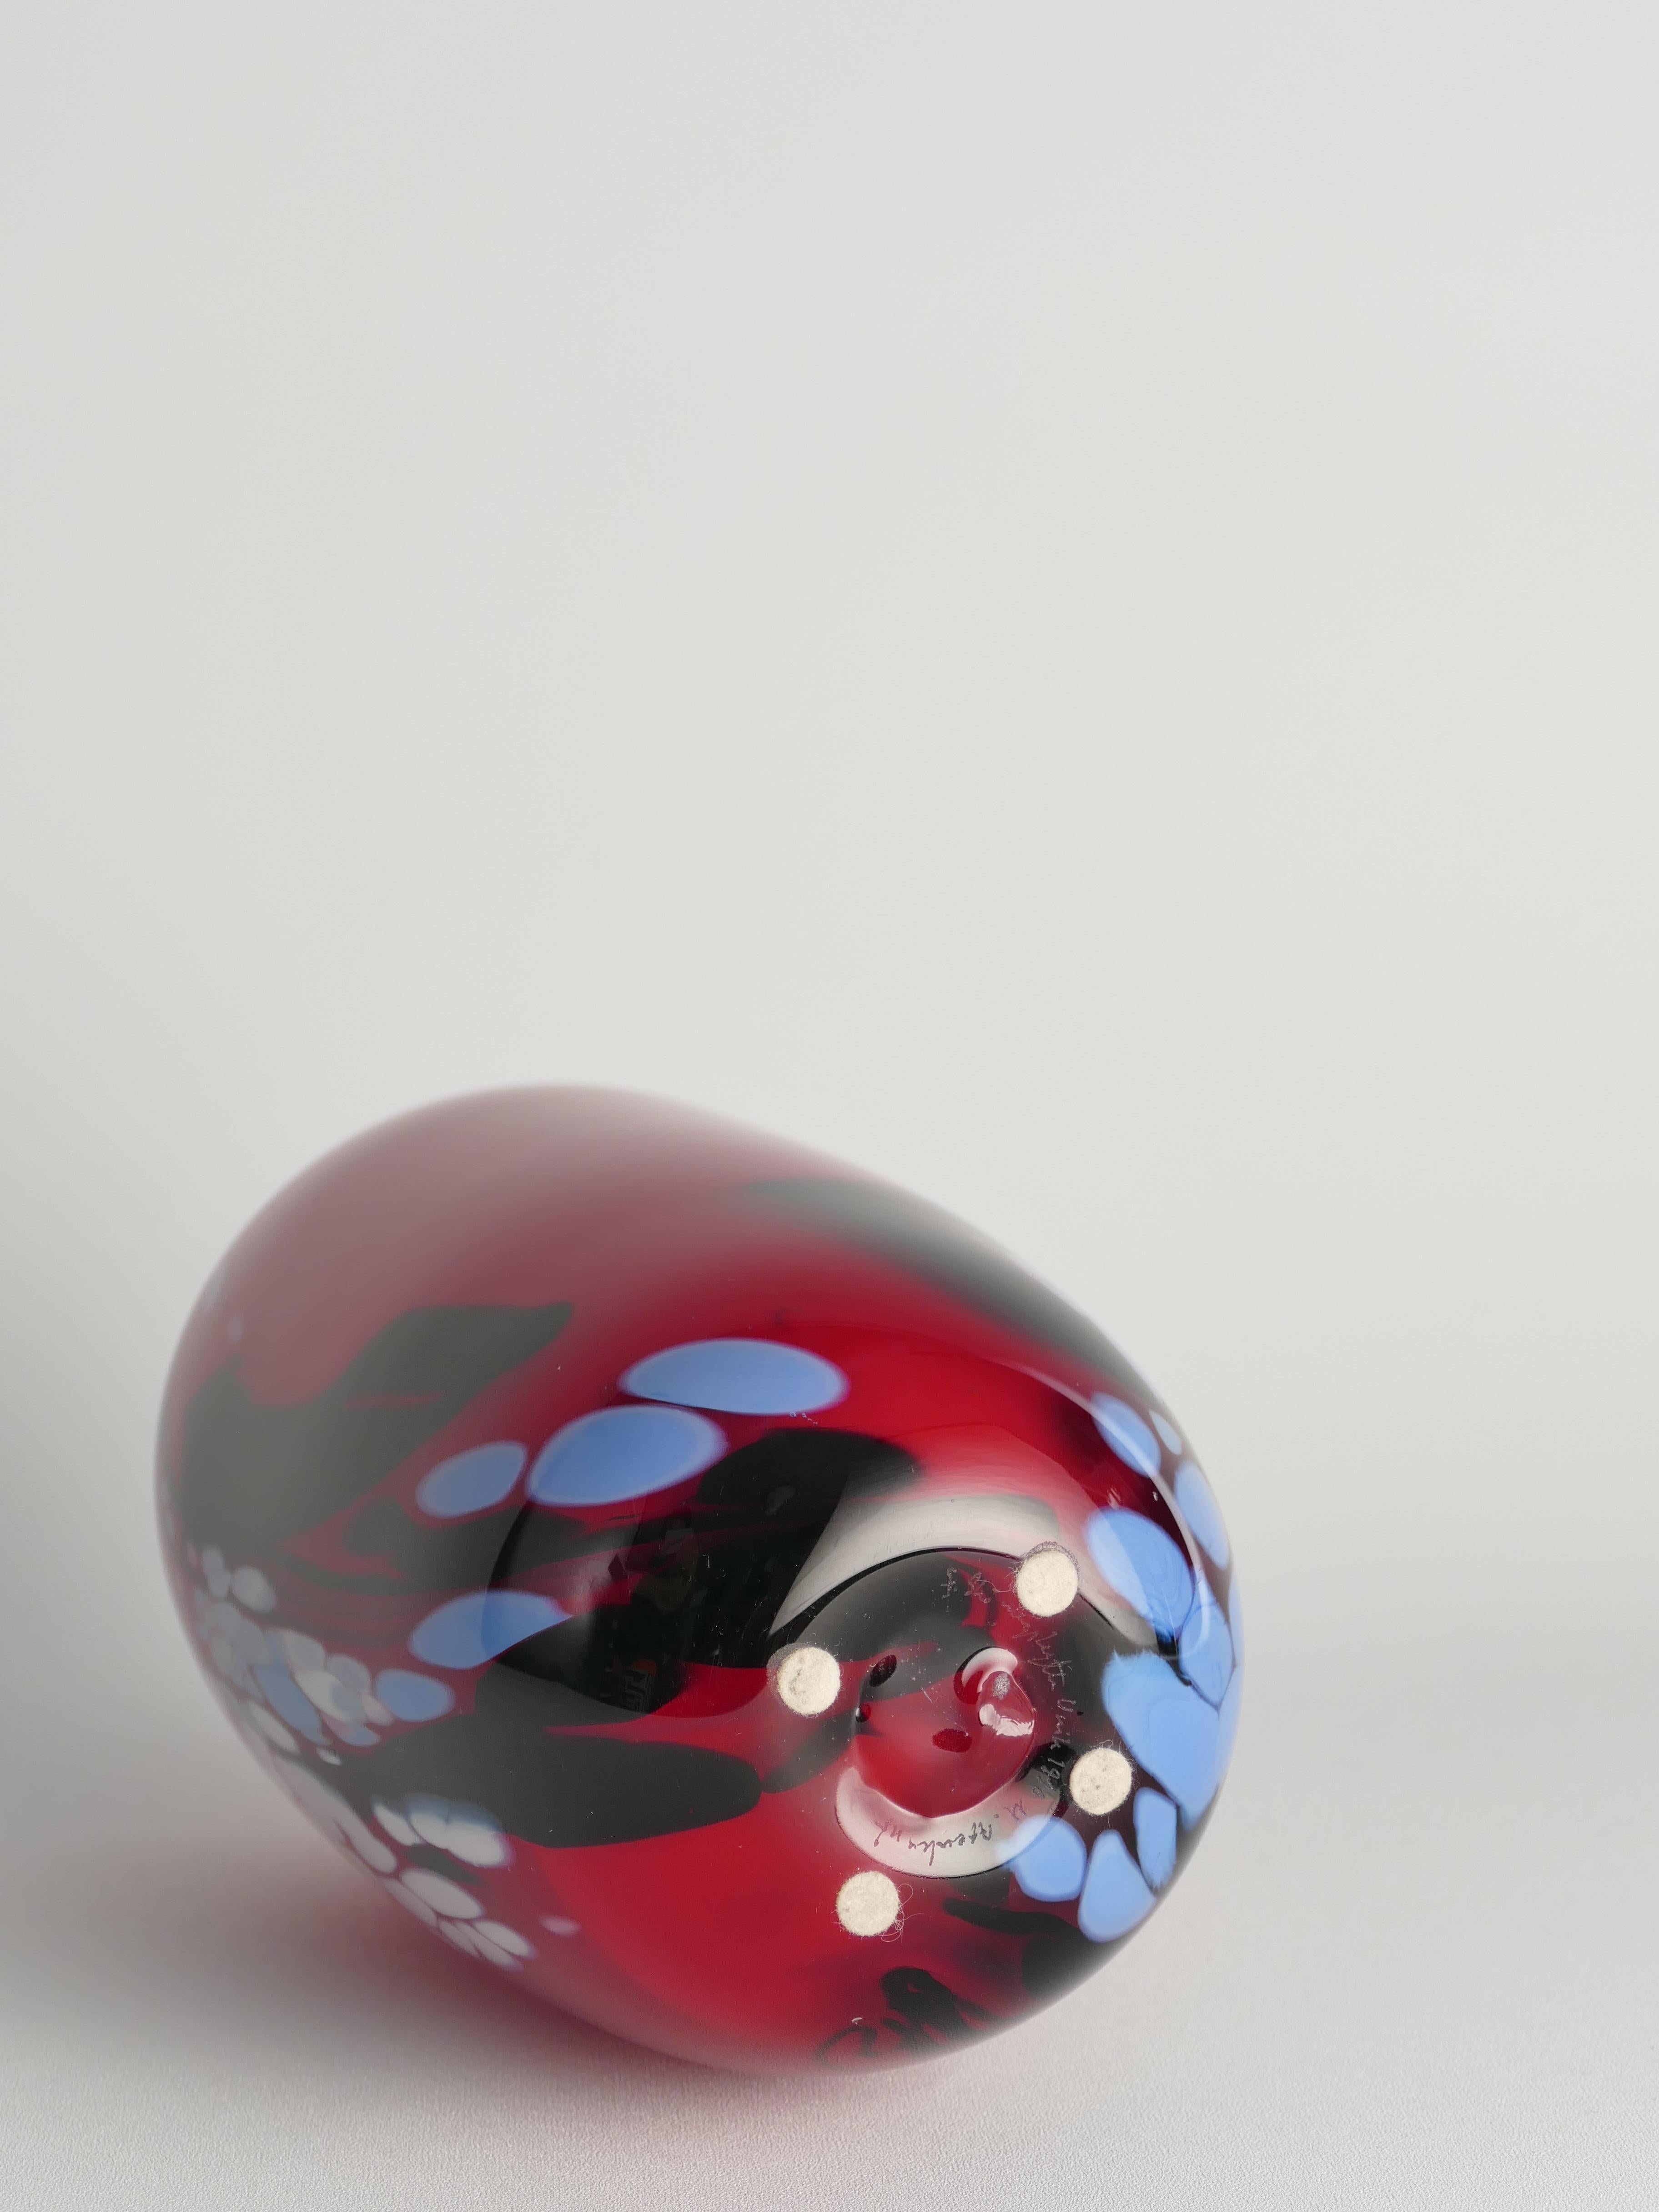 Unique Cherry Red Art Glass Vase by Mikael Axenbrant, Sweden 1990 For Sale 8